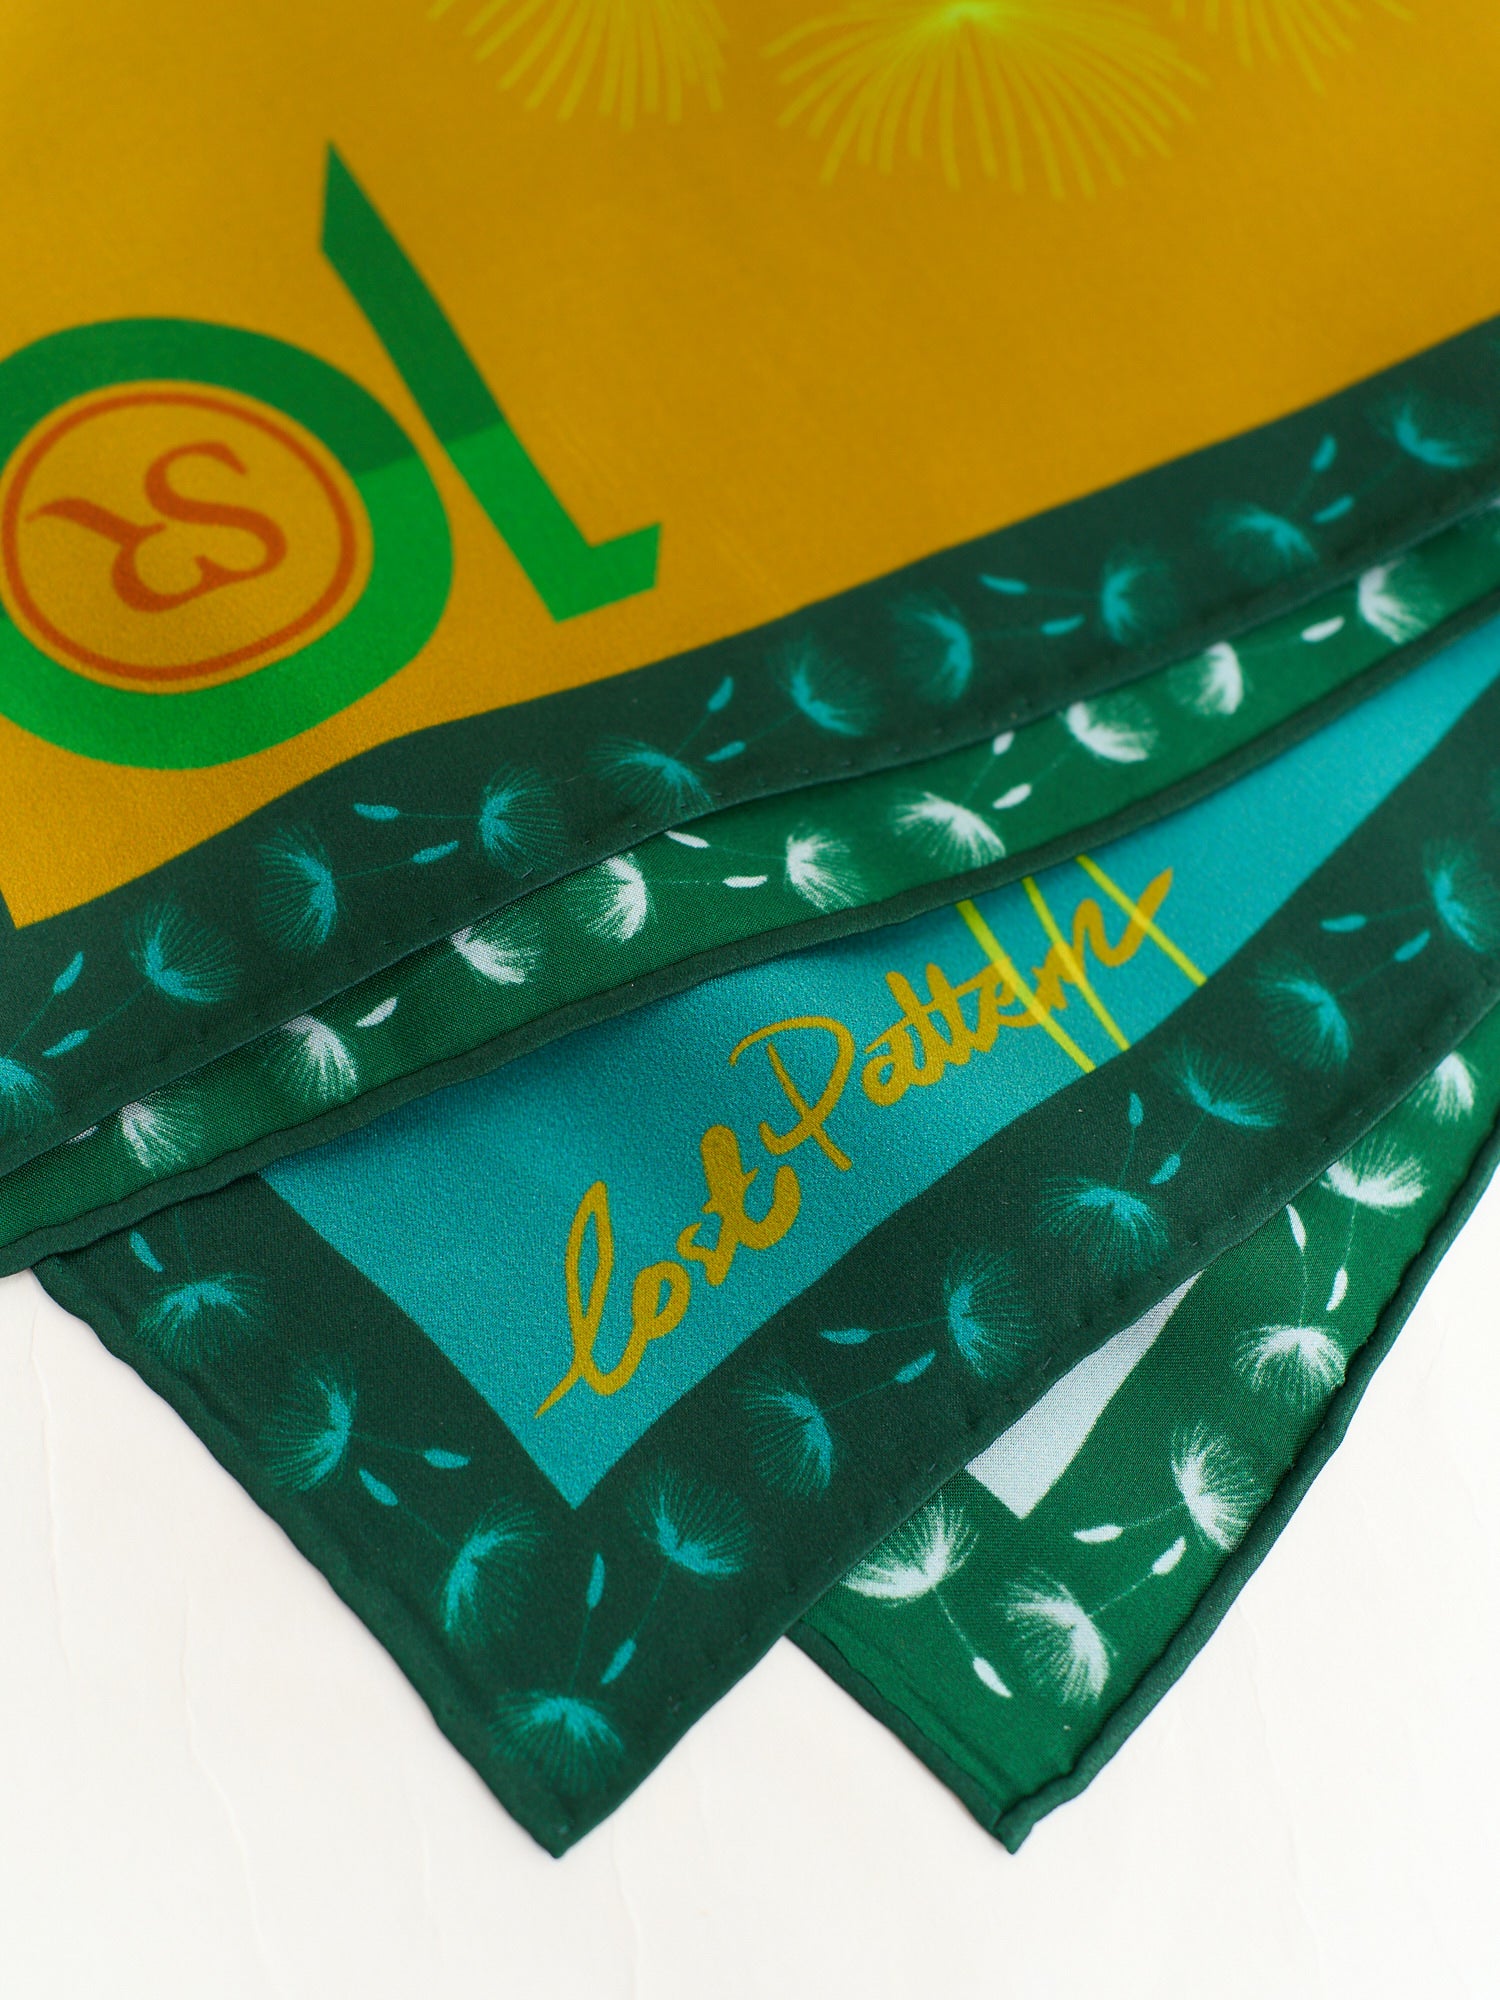 "The Trophy" Silk Scarf for Socially Relevant Film Festival NY - LOST PATTERN Silk Square Scarf